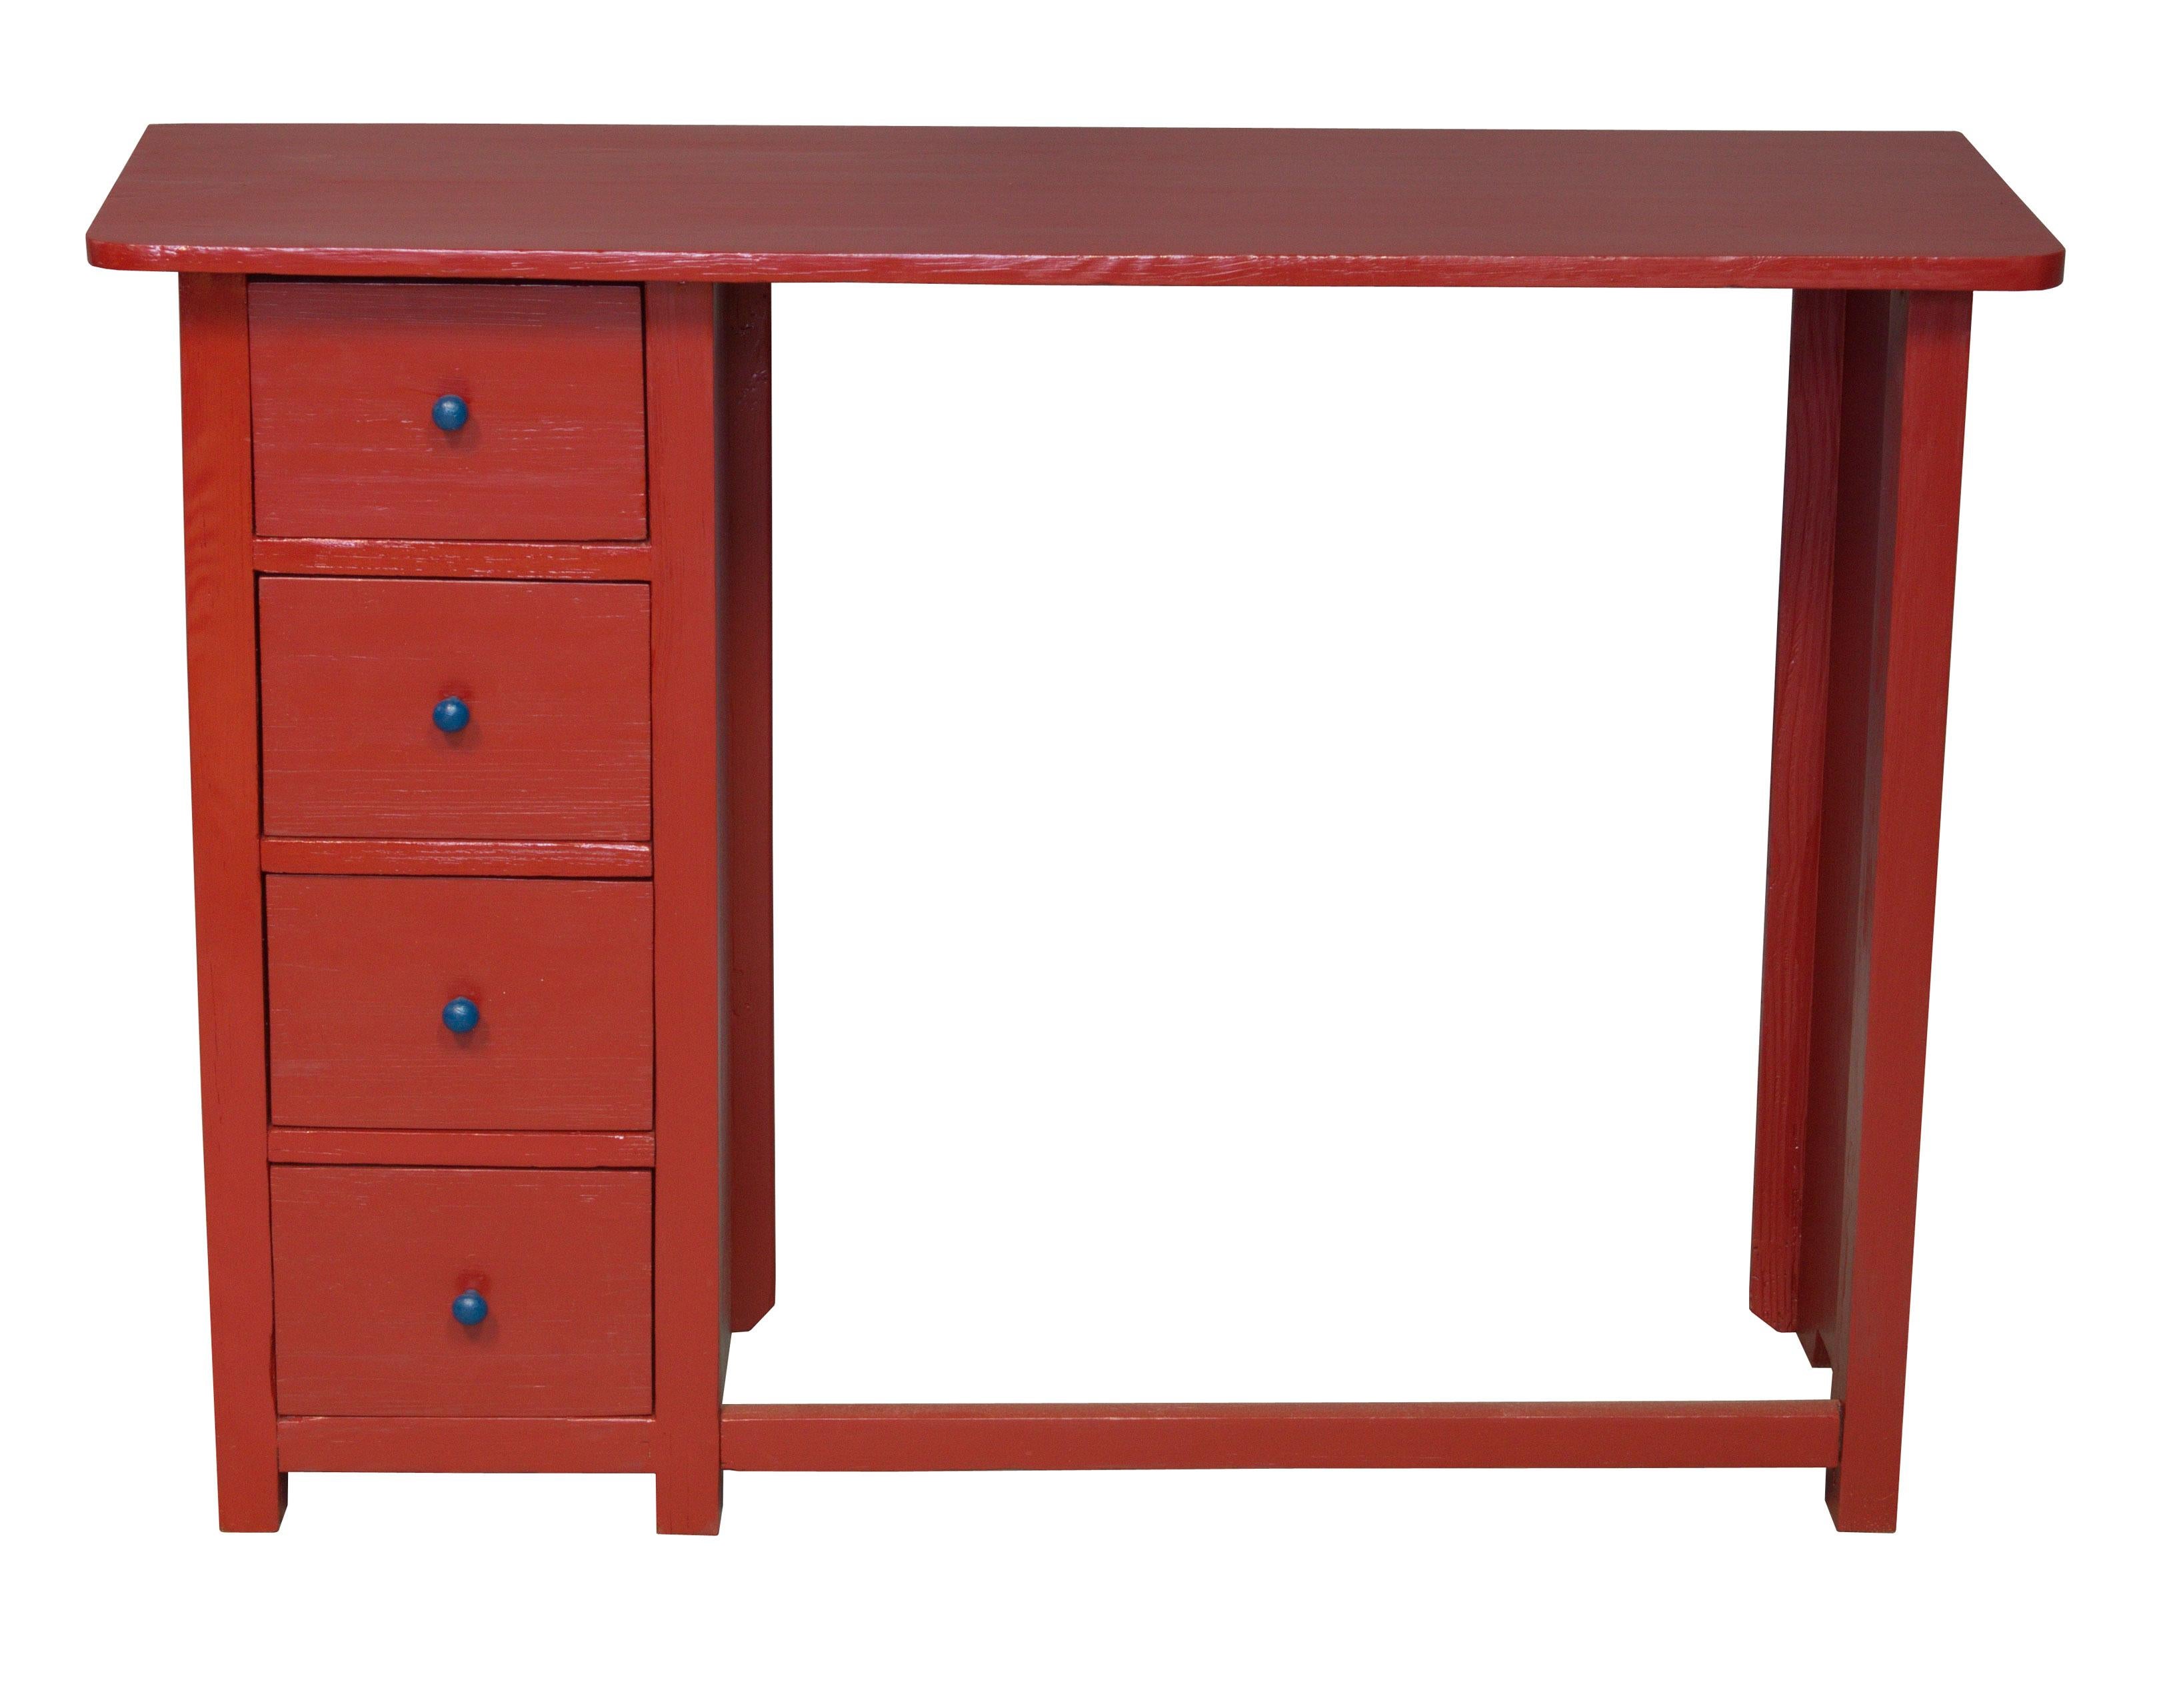 This is a recently restored wooden desk believed to be designed in the 1920’s, with the red and blue colours being the original combination of this piece. The main colour of the table is bright red with a vivid blue draw handles, which creates an